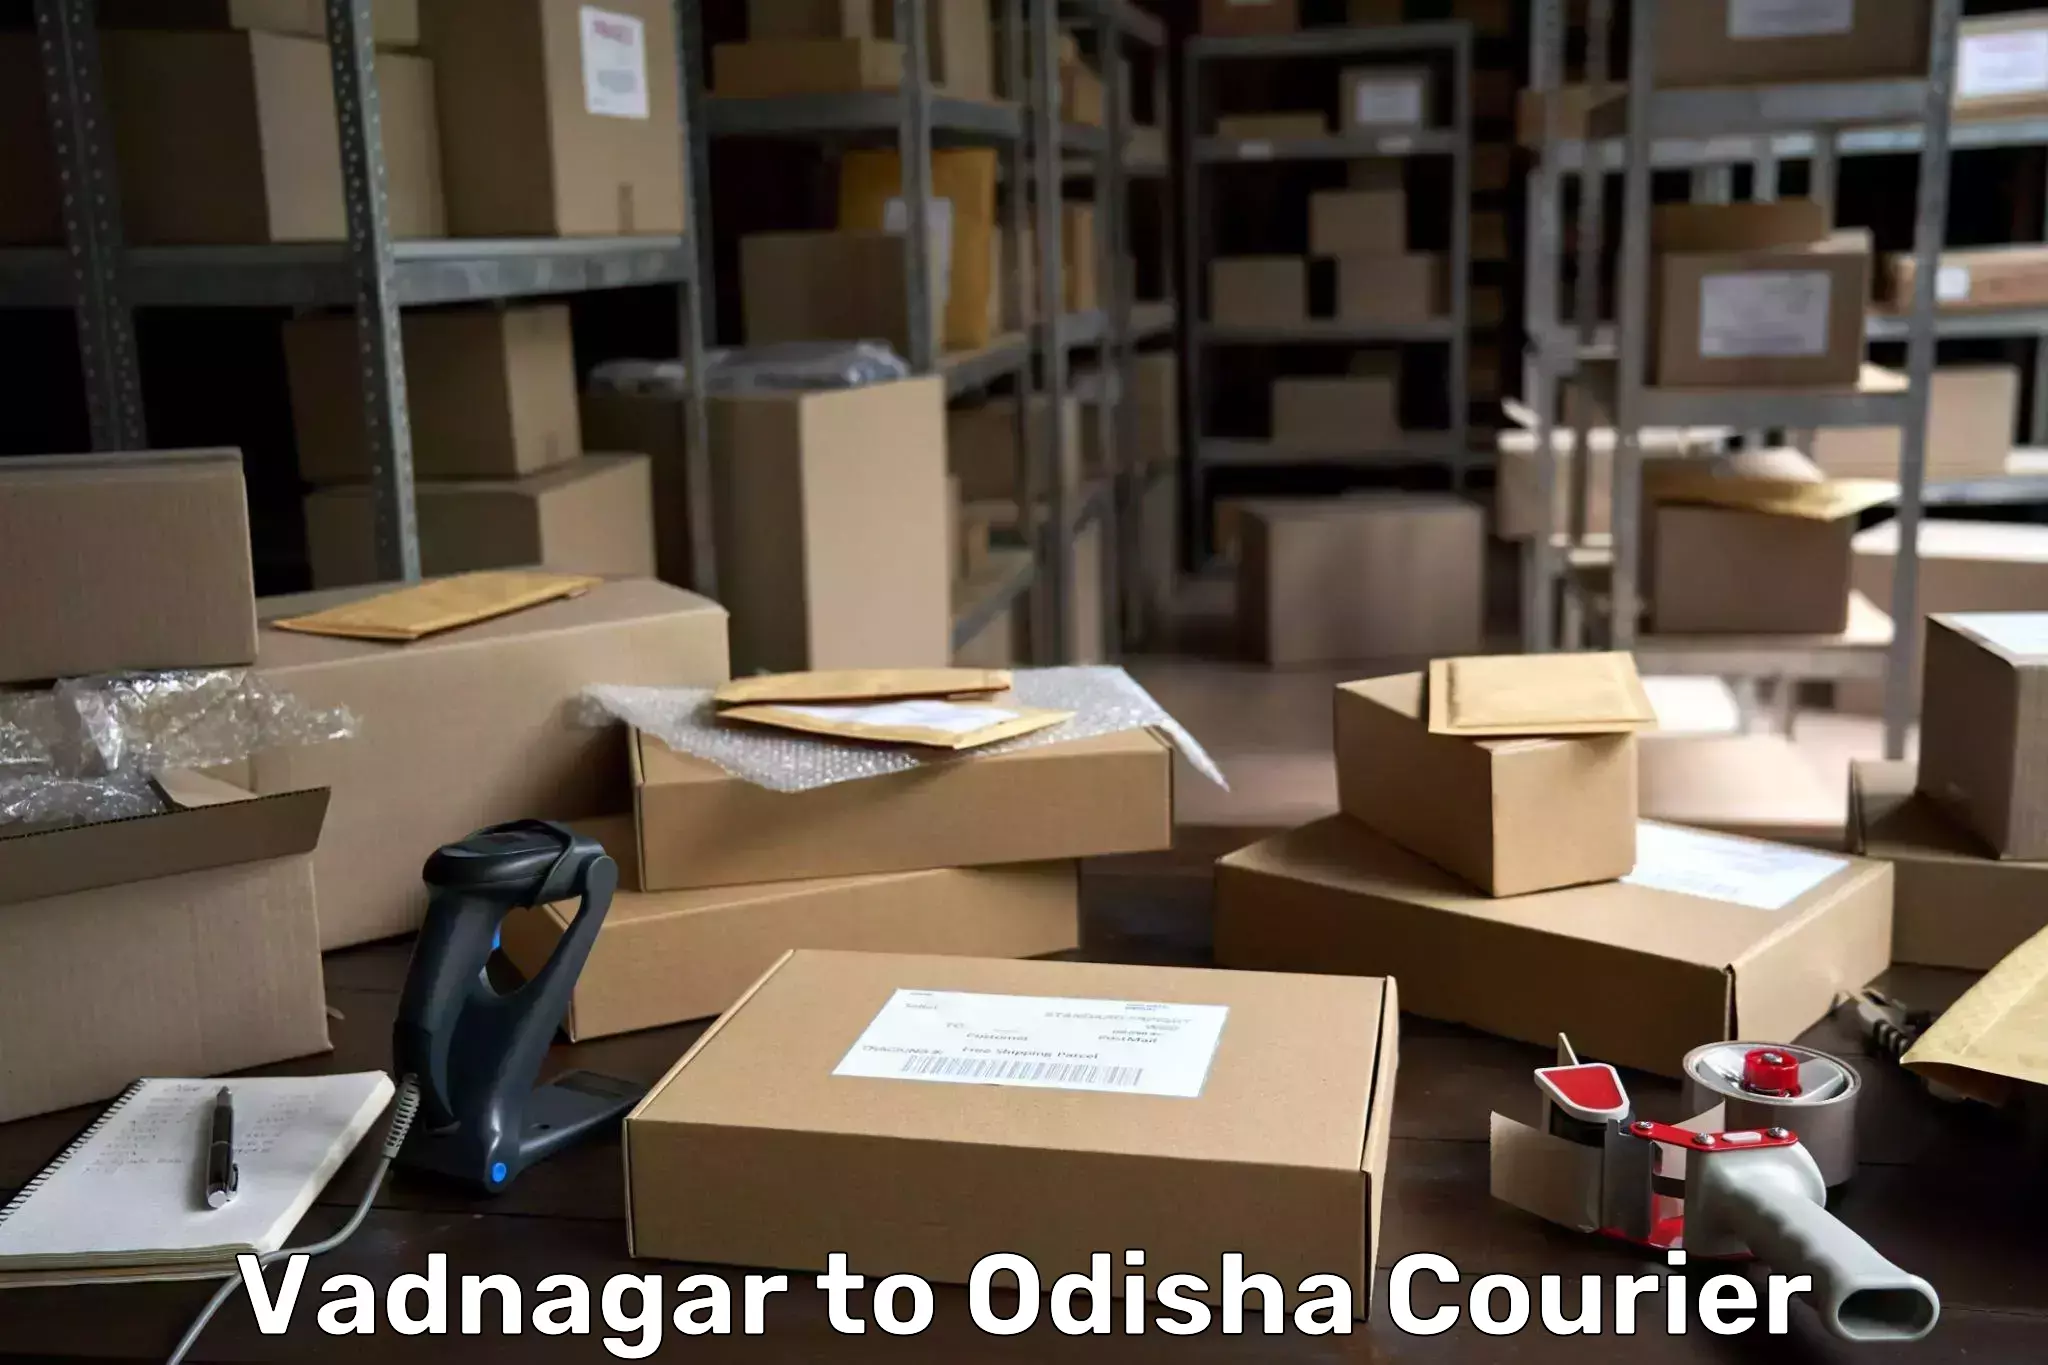 Sustainable shipping practices Vadnagar to Odisha